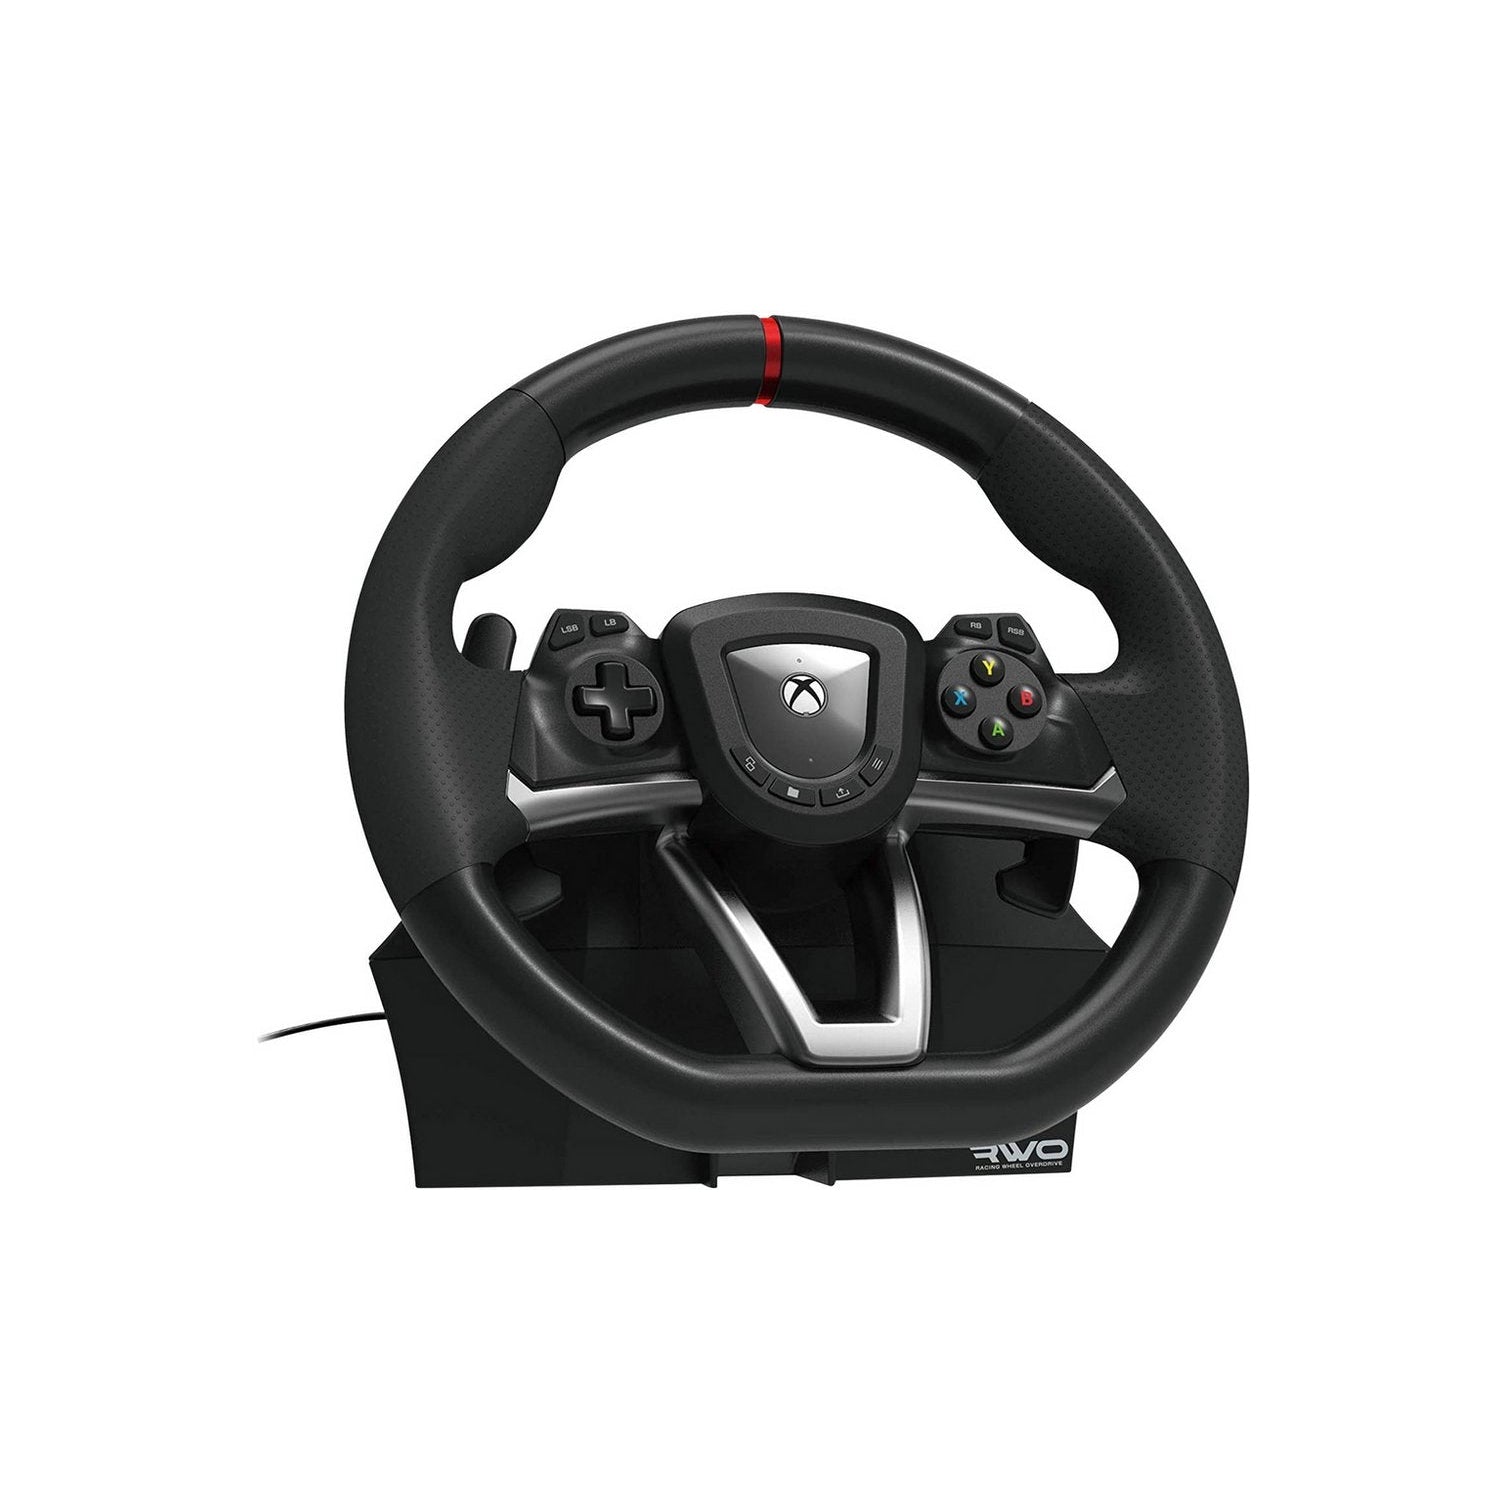 Hori Racing Wheel Overdrive for Xbox One & PC - Refurbished Excellent